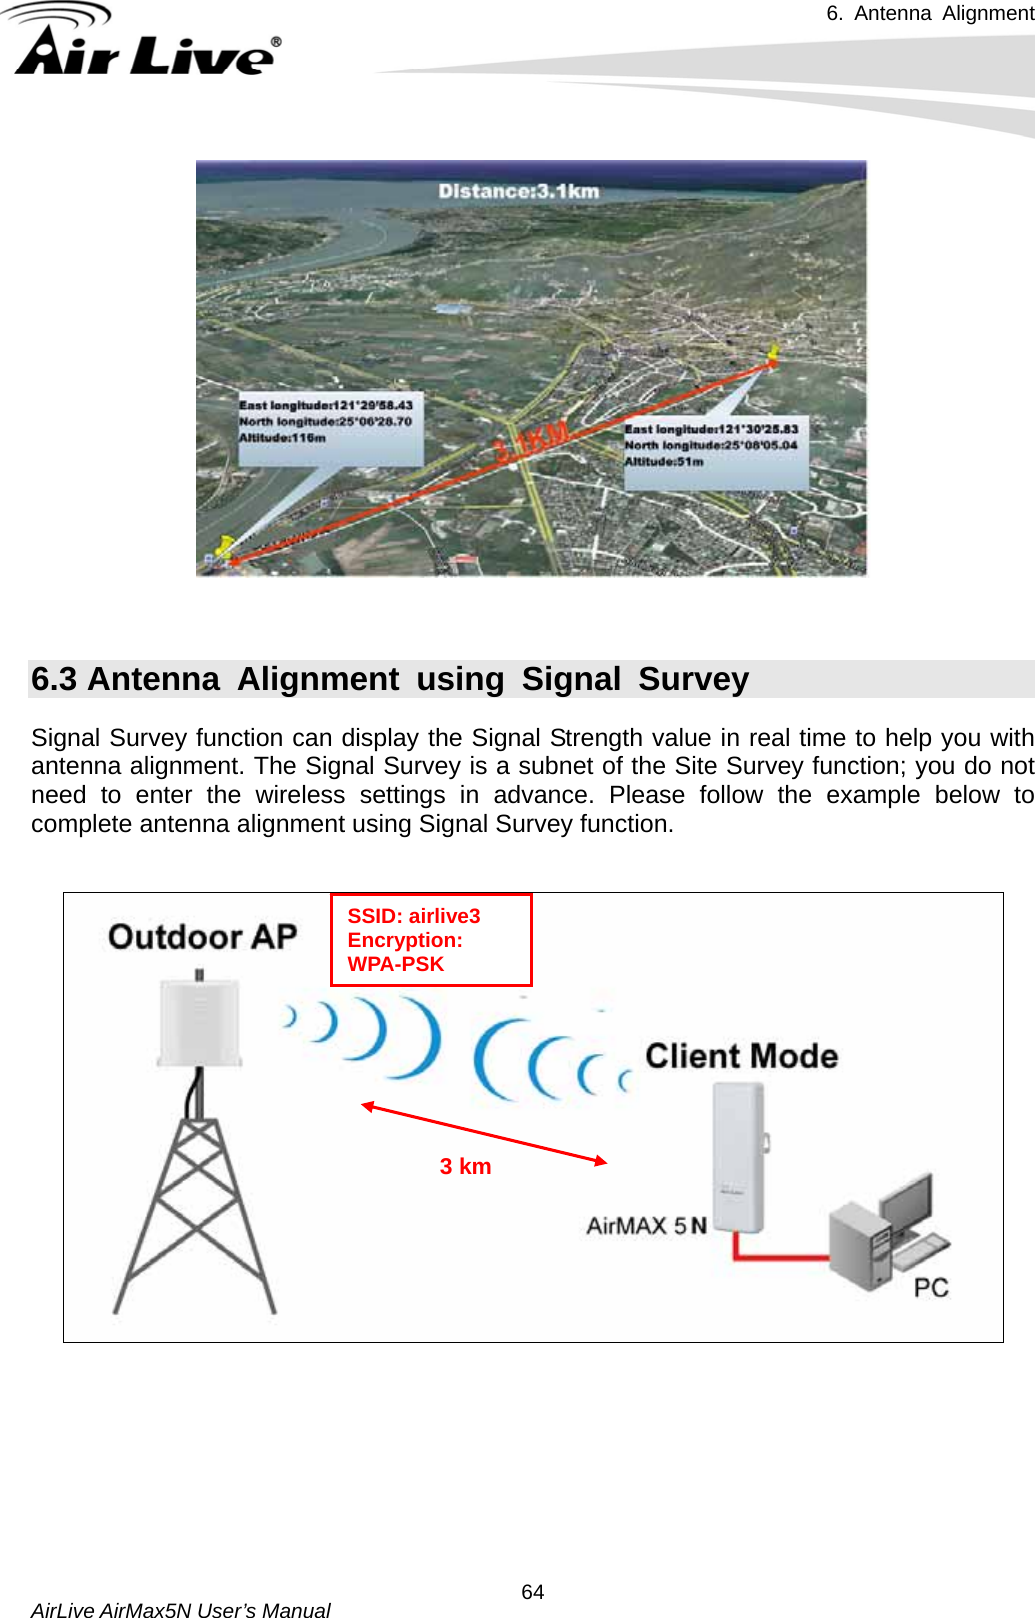 6. Antenna Alignment   AirLive AirMax5N User’s Manual  64   6.3 Antenna Alignment using Signal Survey Signal Survey function can display the Signal Strength value in real time to help you with antenna alignment. The Signal Survey is a subnet of the Site Survey function; you do not need to enter the wireless settings in advance. Please follow the example below to complete antenna alignment using Signal Survey function.  SSID: airlive3 Encryption: WPA-PSK 3 km        